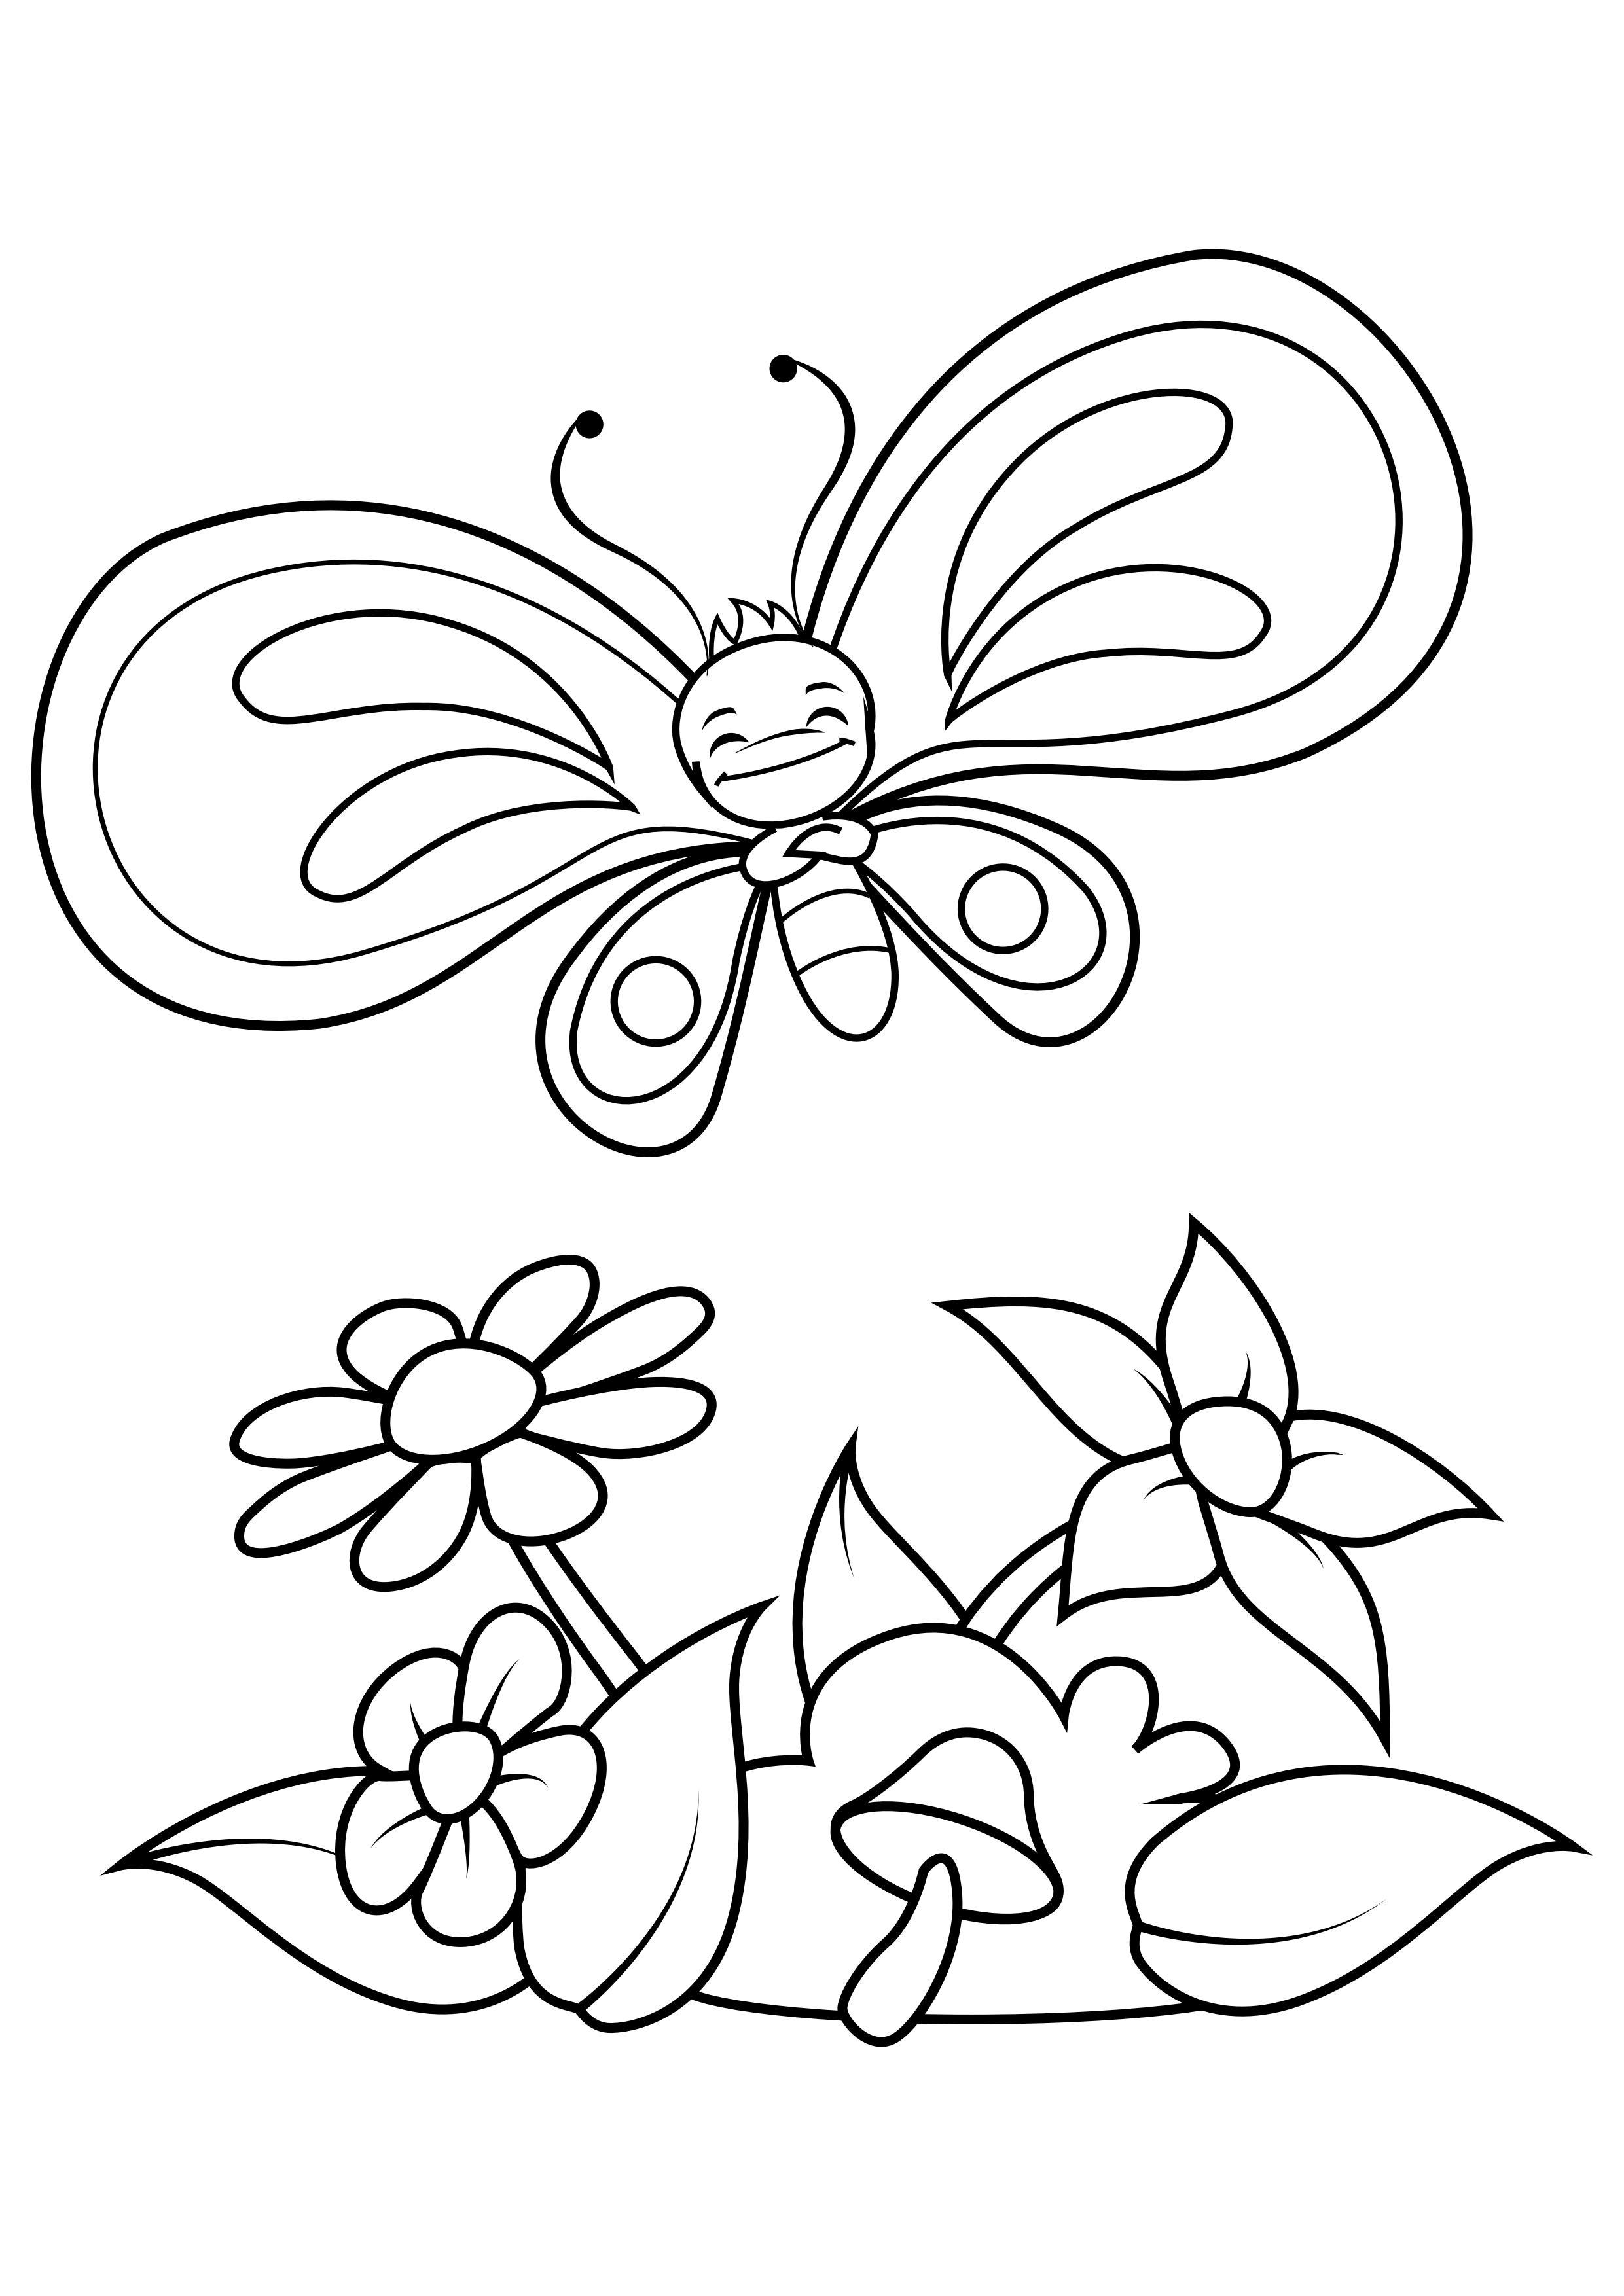 Coloring page butterfly enjoys